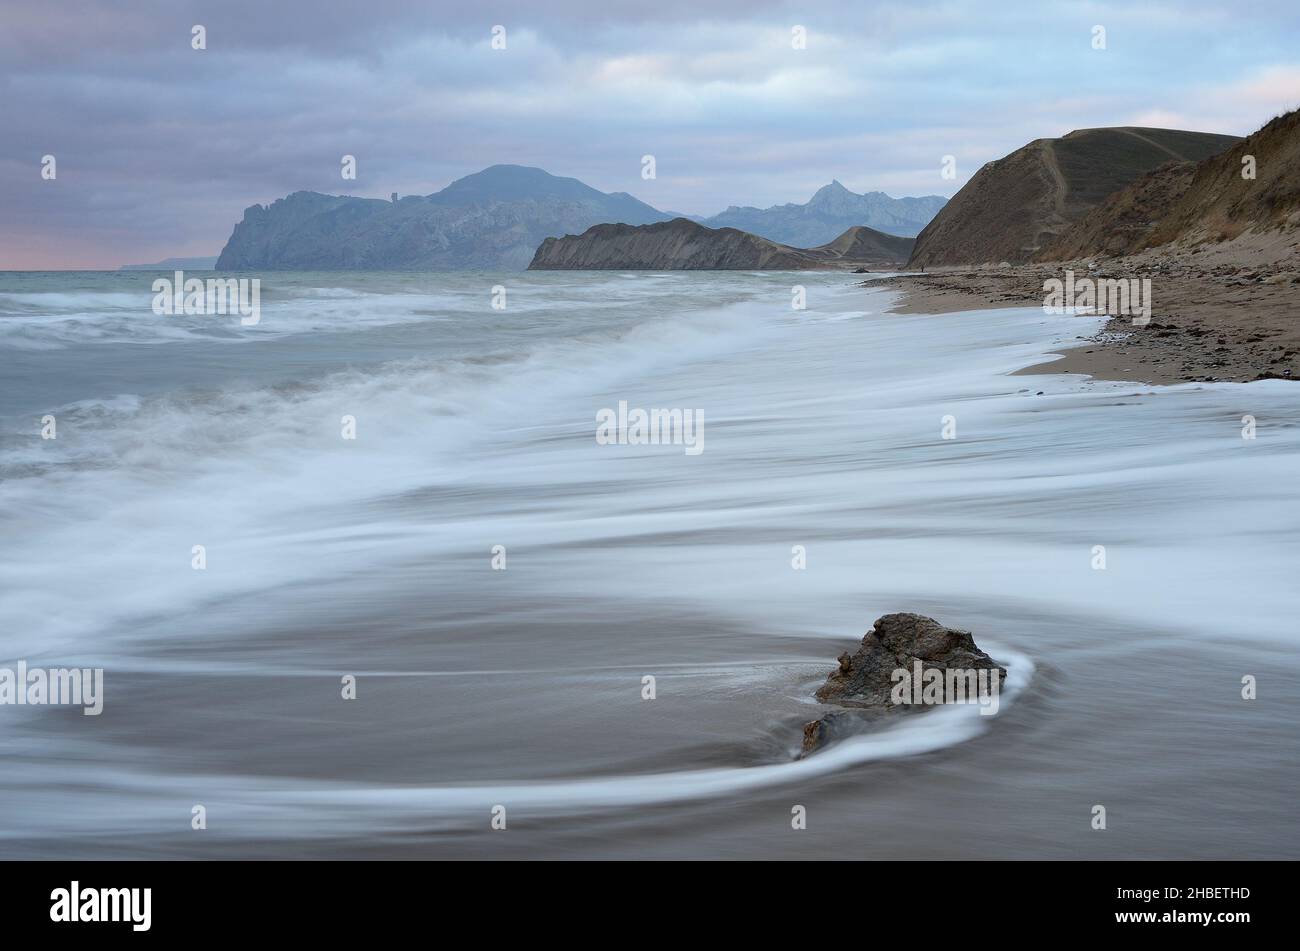 Sea landscape with beautiful traces of water on the sand. View of the Cape and the mountain range. Overcast morning with clouds Stock Photo